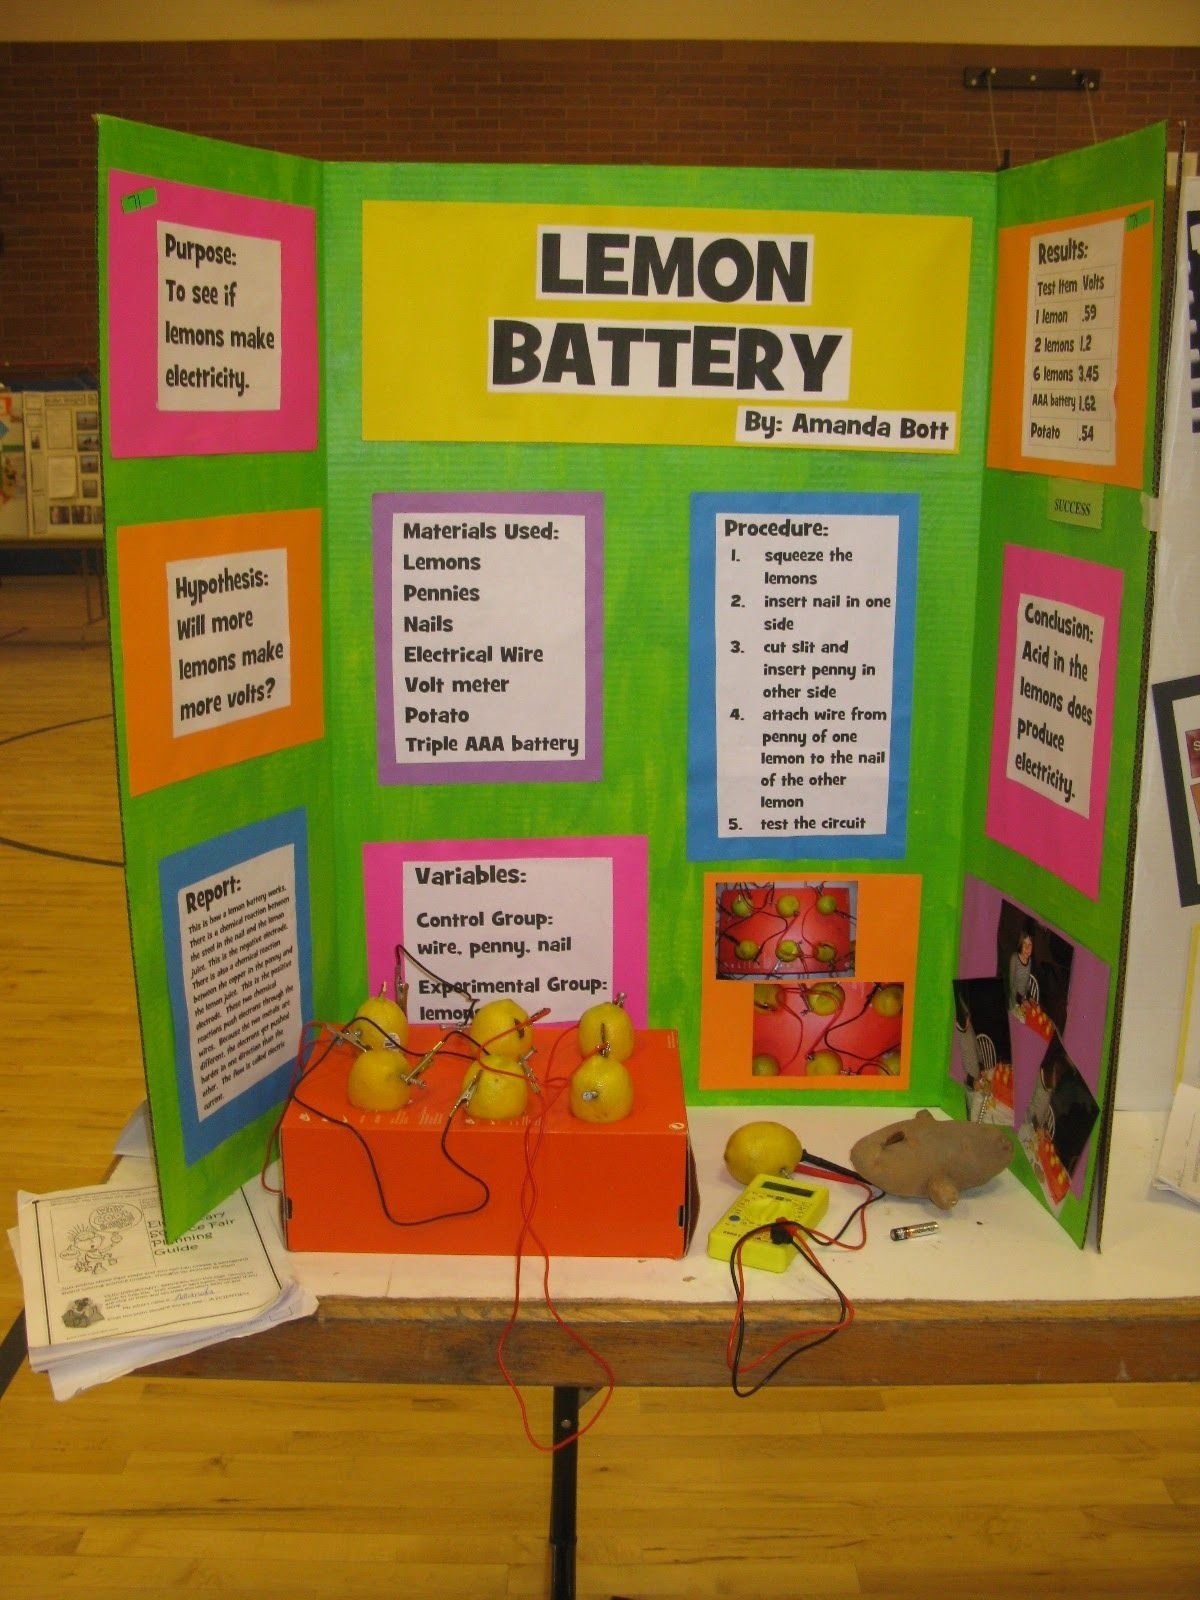 10 Lovable Ideas For A Science Project the science of my life updated declo science fair with newspaper 60 2023